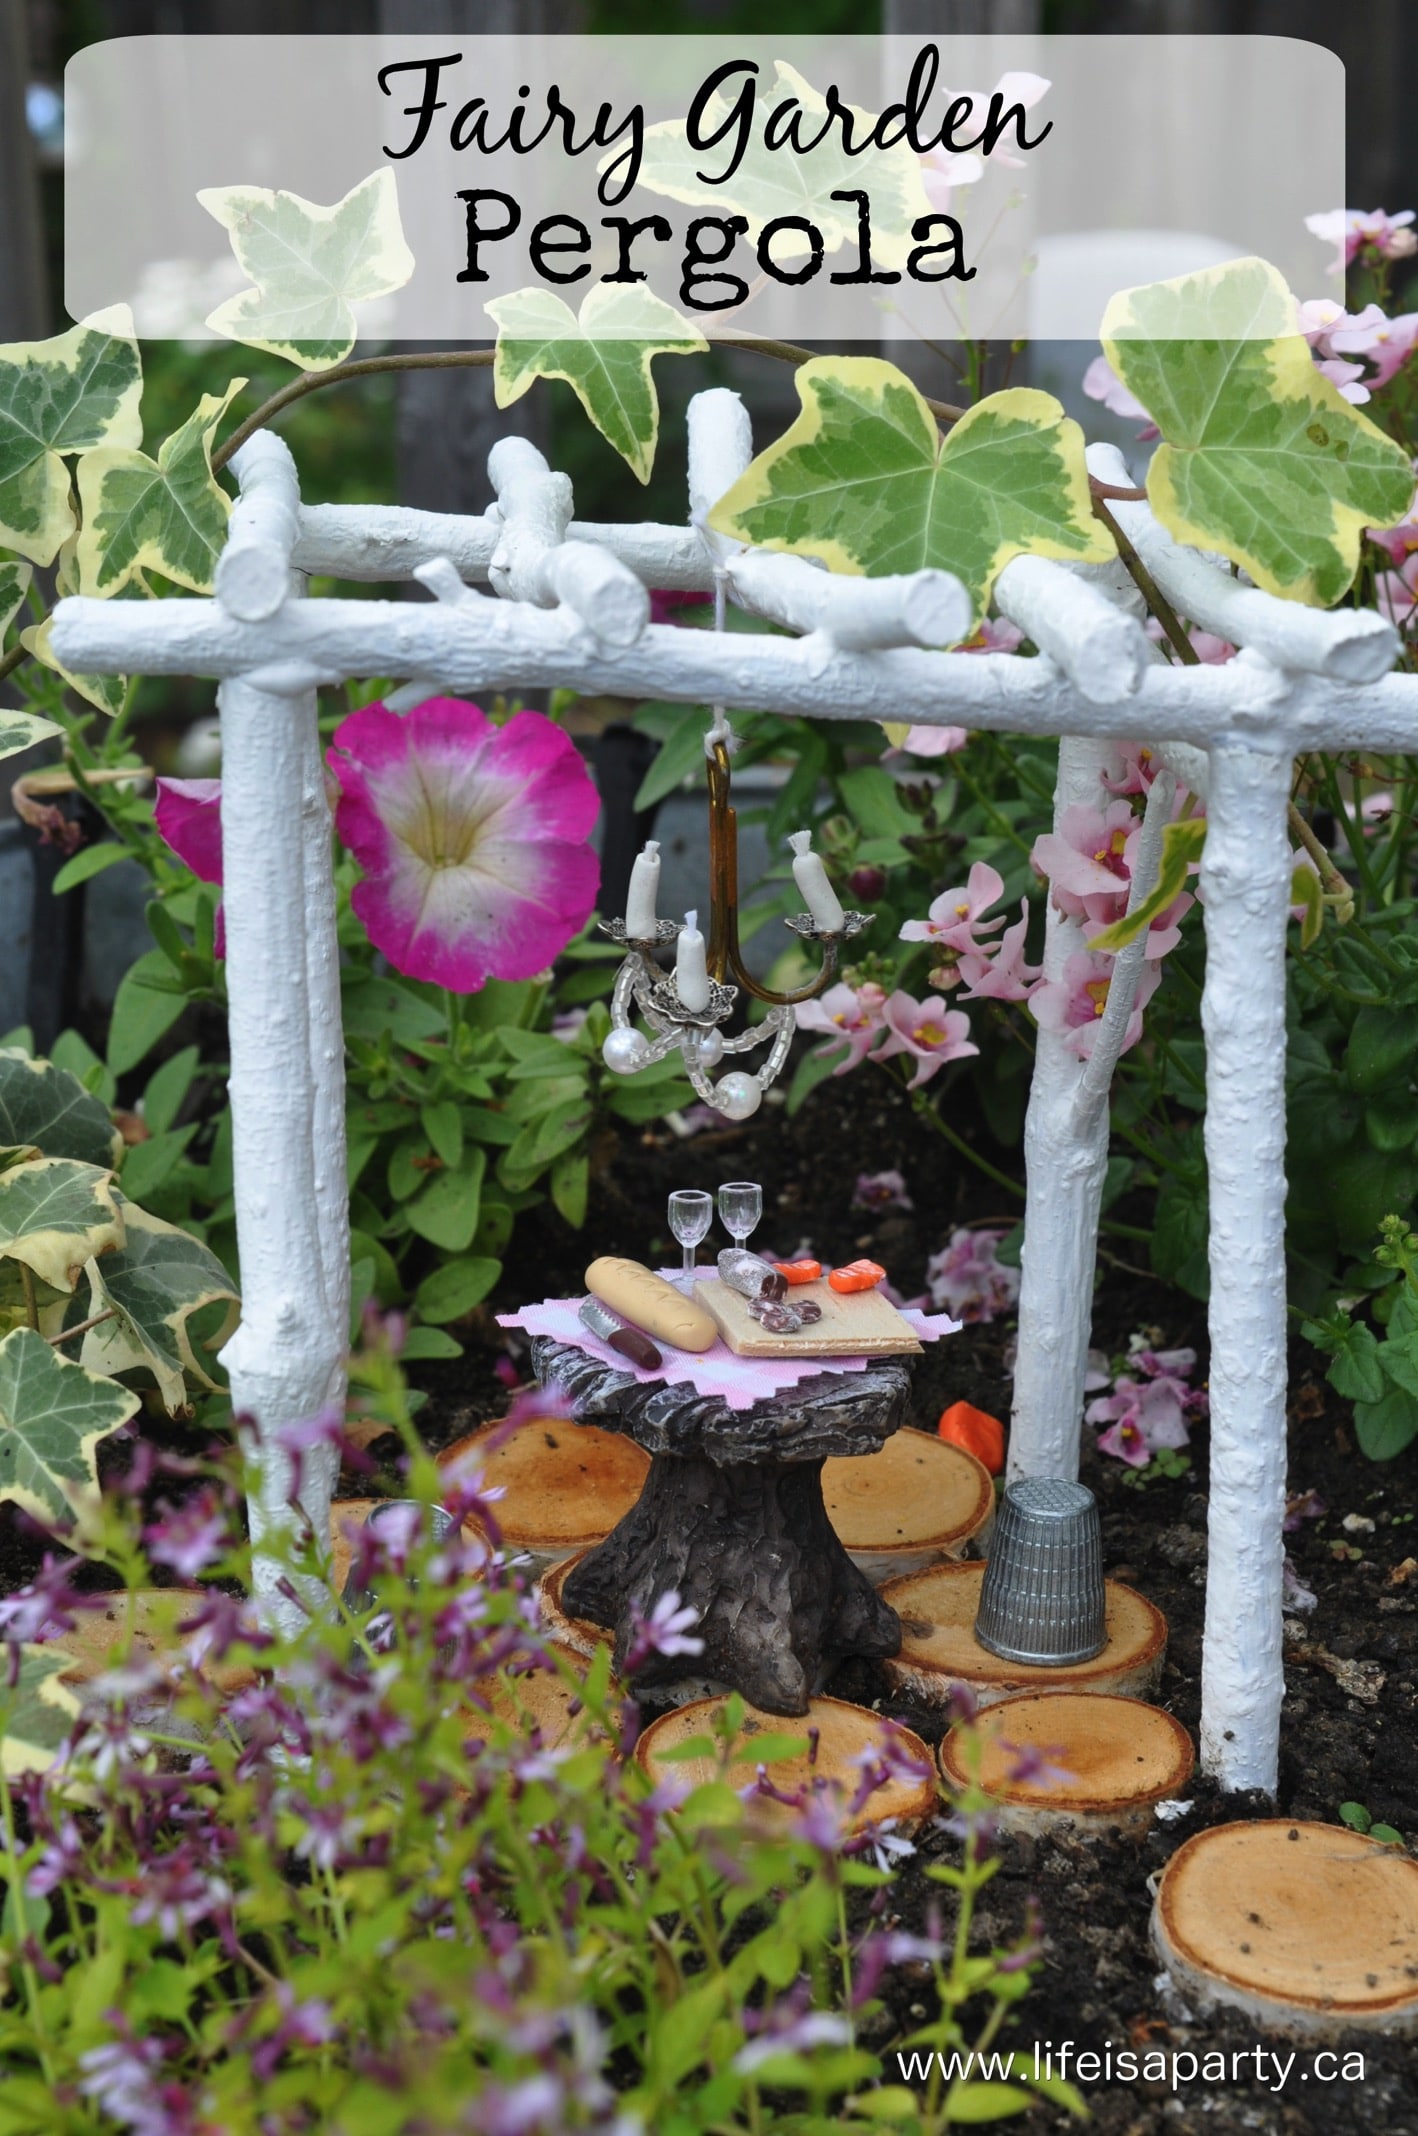 DIY Fairy Garden Furniture: easy how to instructions to make a miniature twig pergola/gazebo/arbor for a fairy garden using twigs, glue, and paint.